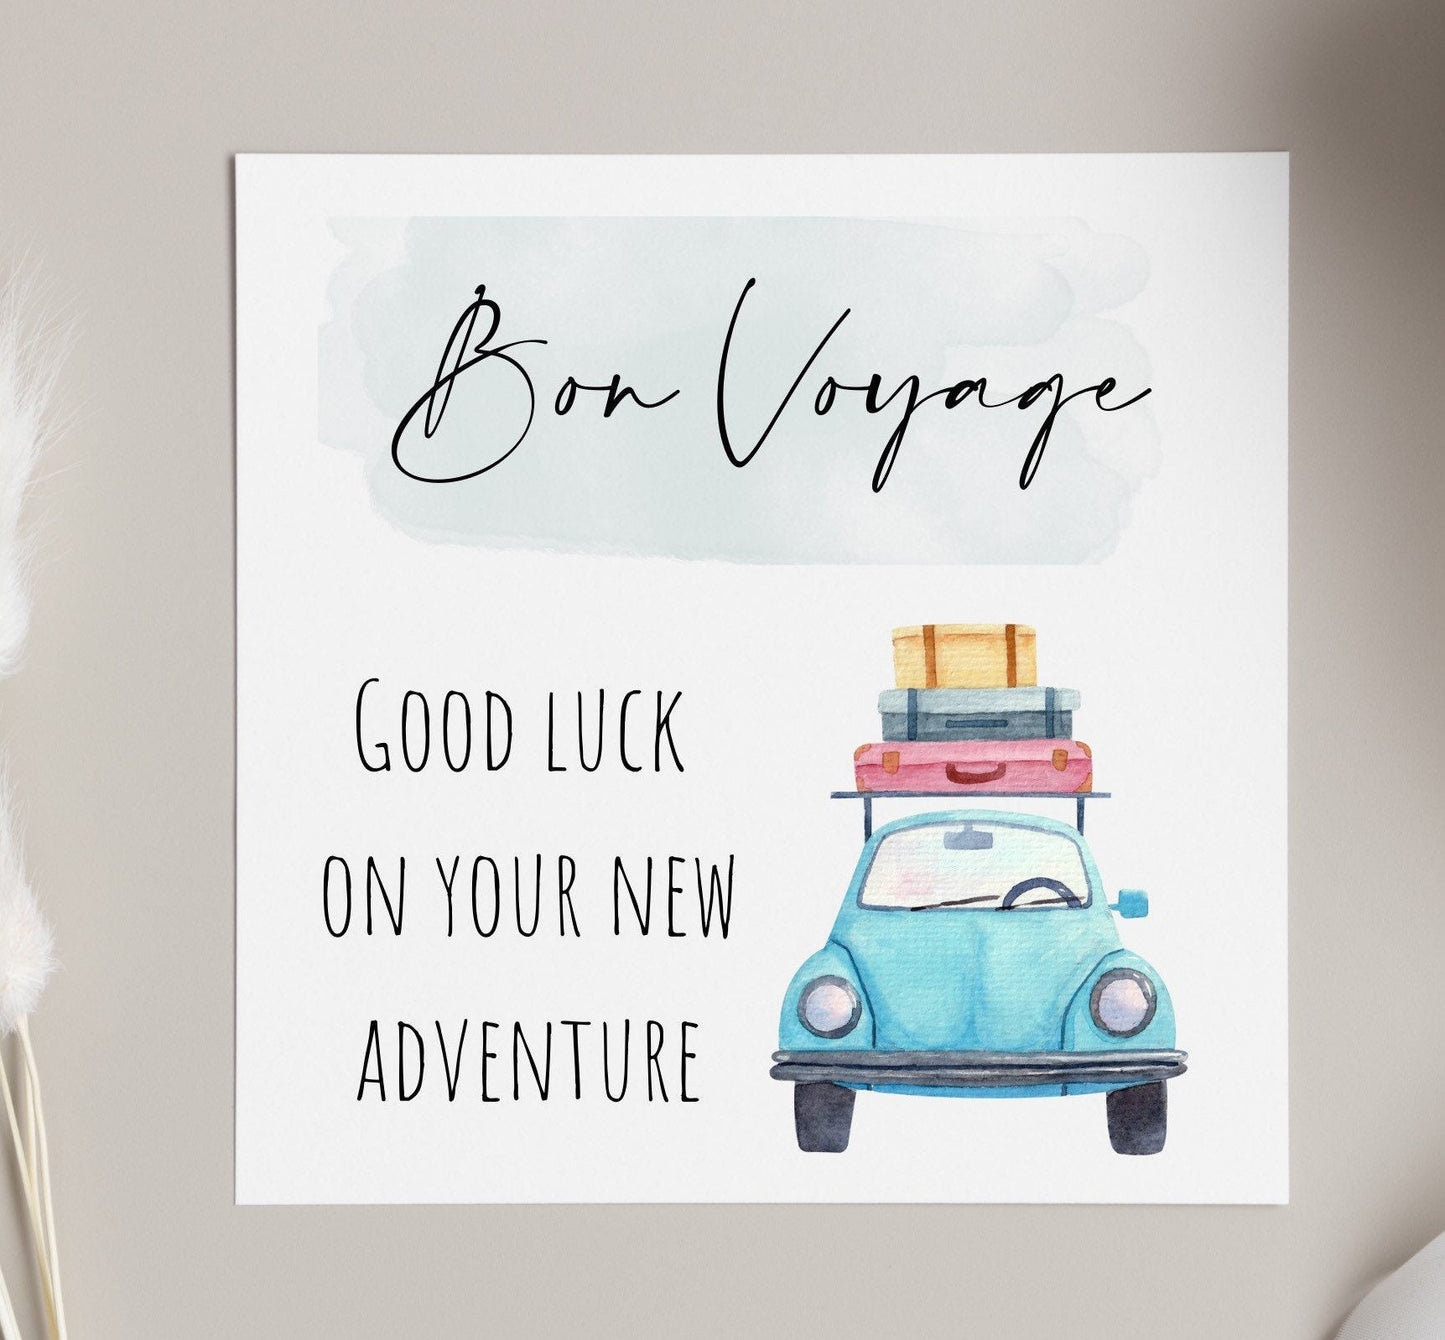 Bon voyage card, good luck on new adventure, leaving card, card for travelling friends, gap year card, retirement card